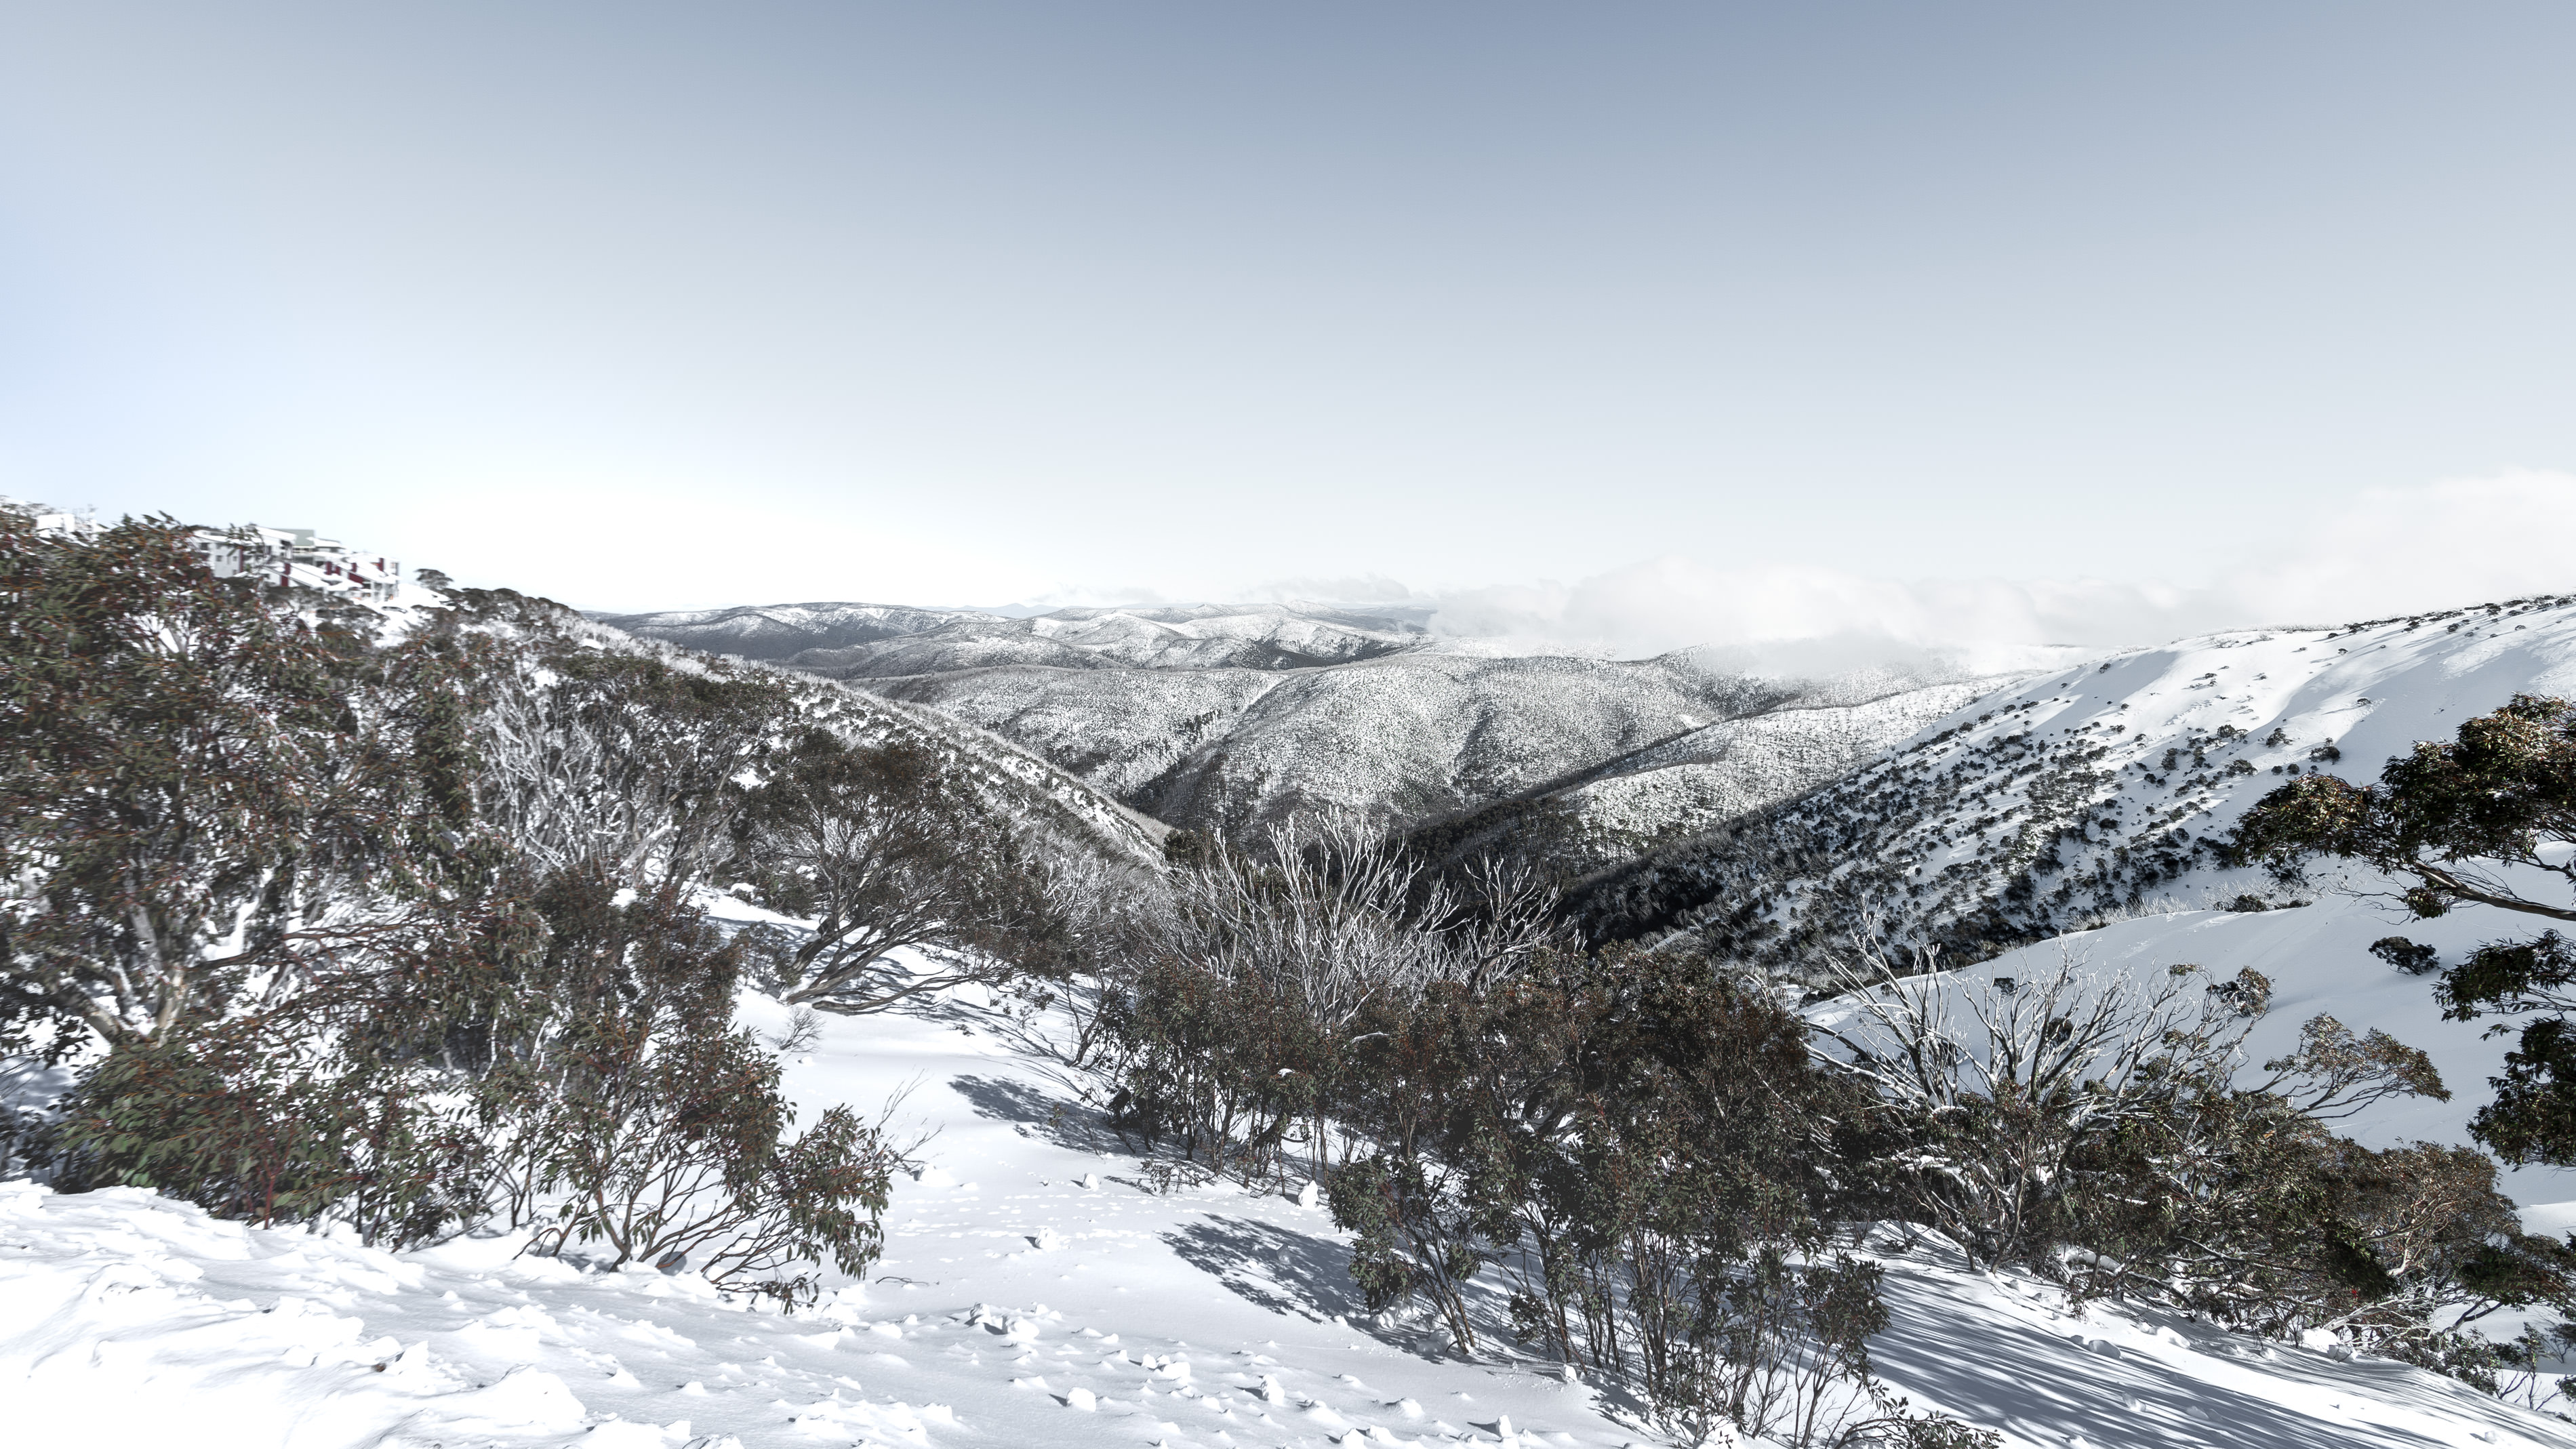 Travel photography of Mt Hotham's Snowy Peaks